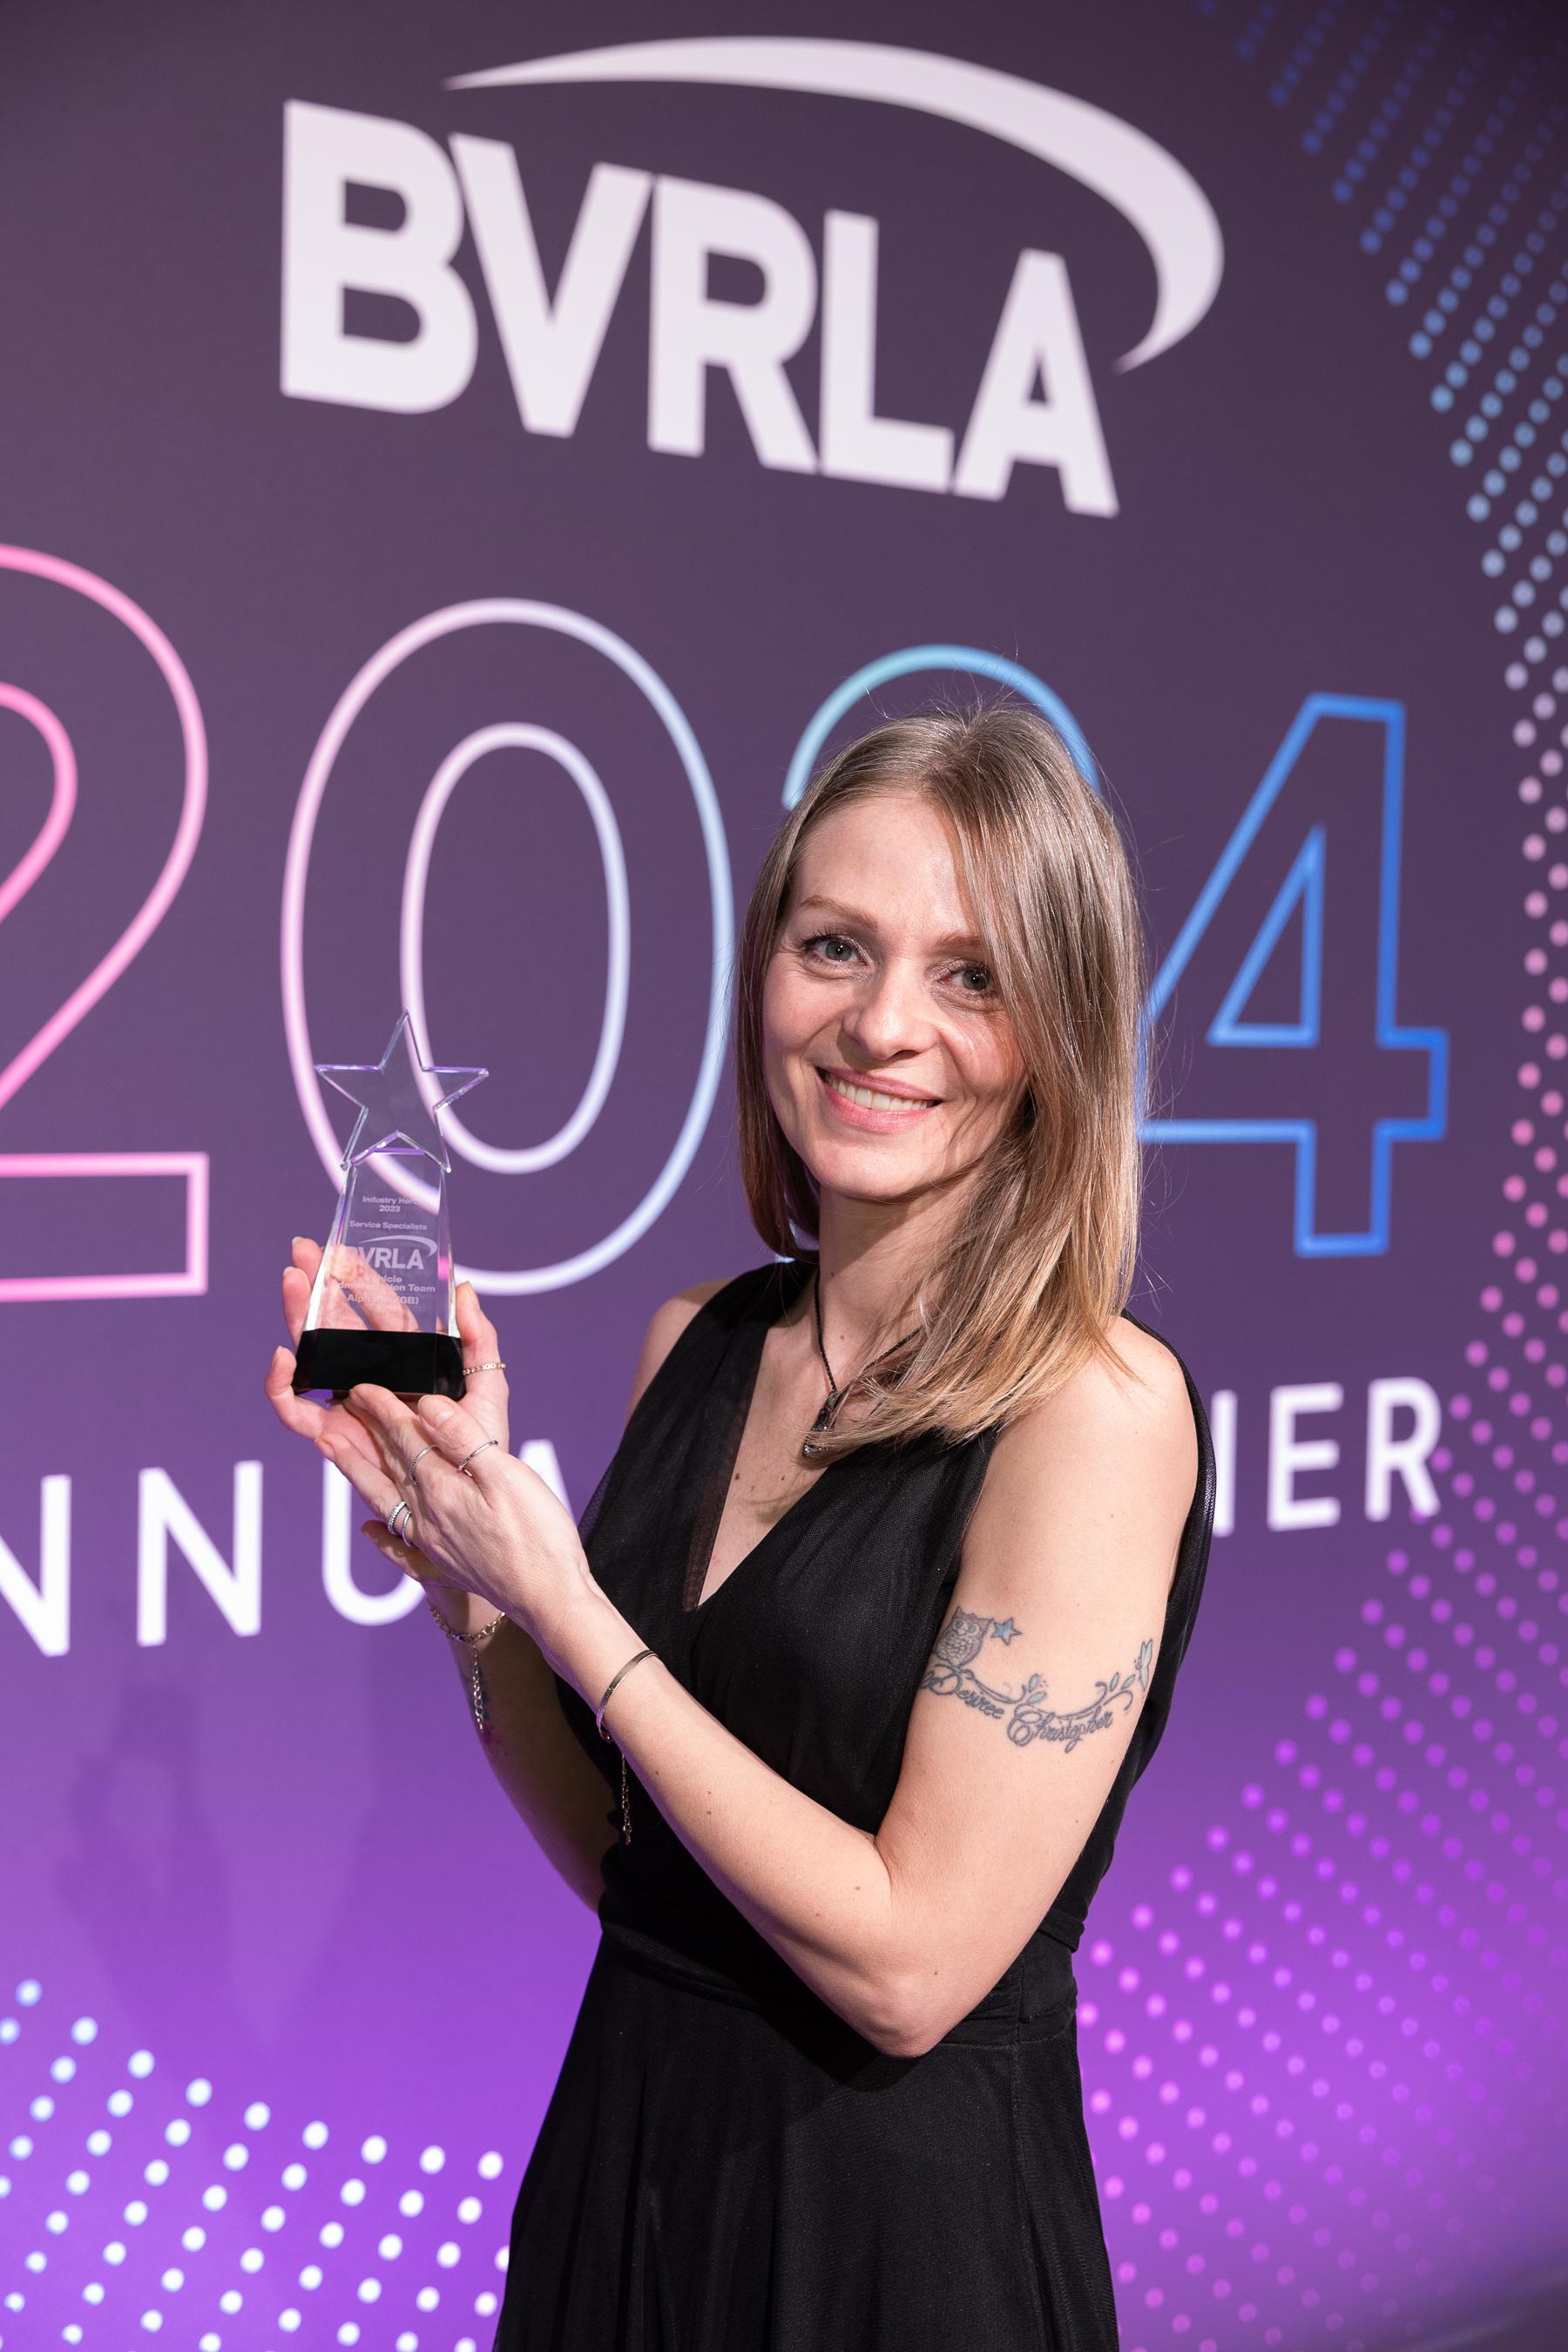 Alphabet hailed BVRLA Industry Hero with event's first-ever team award